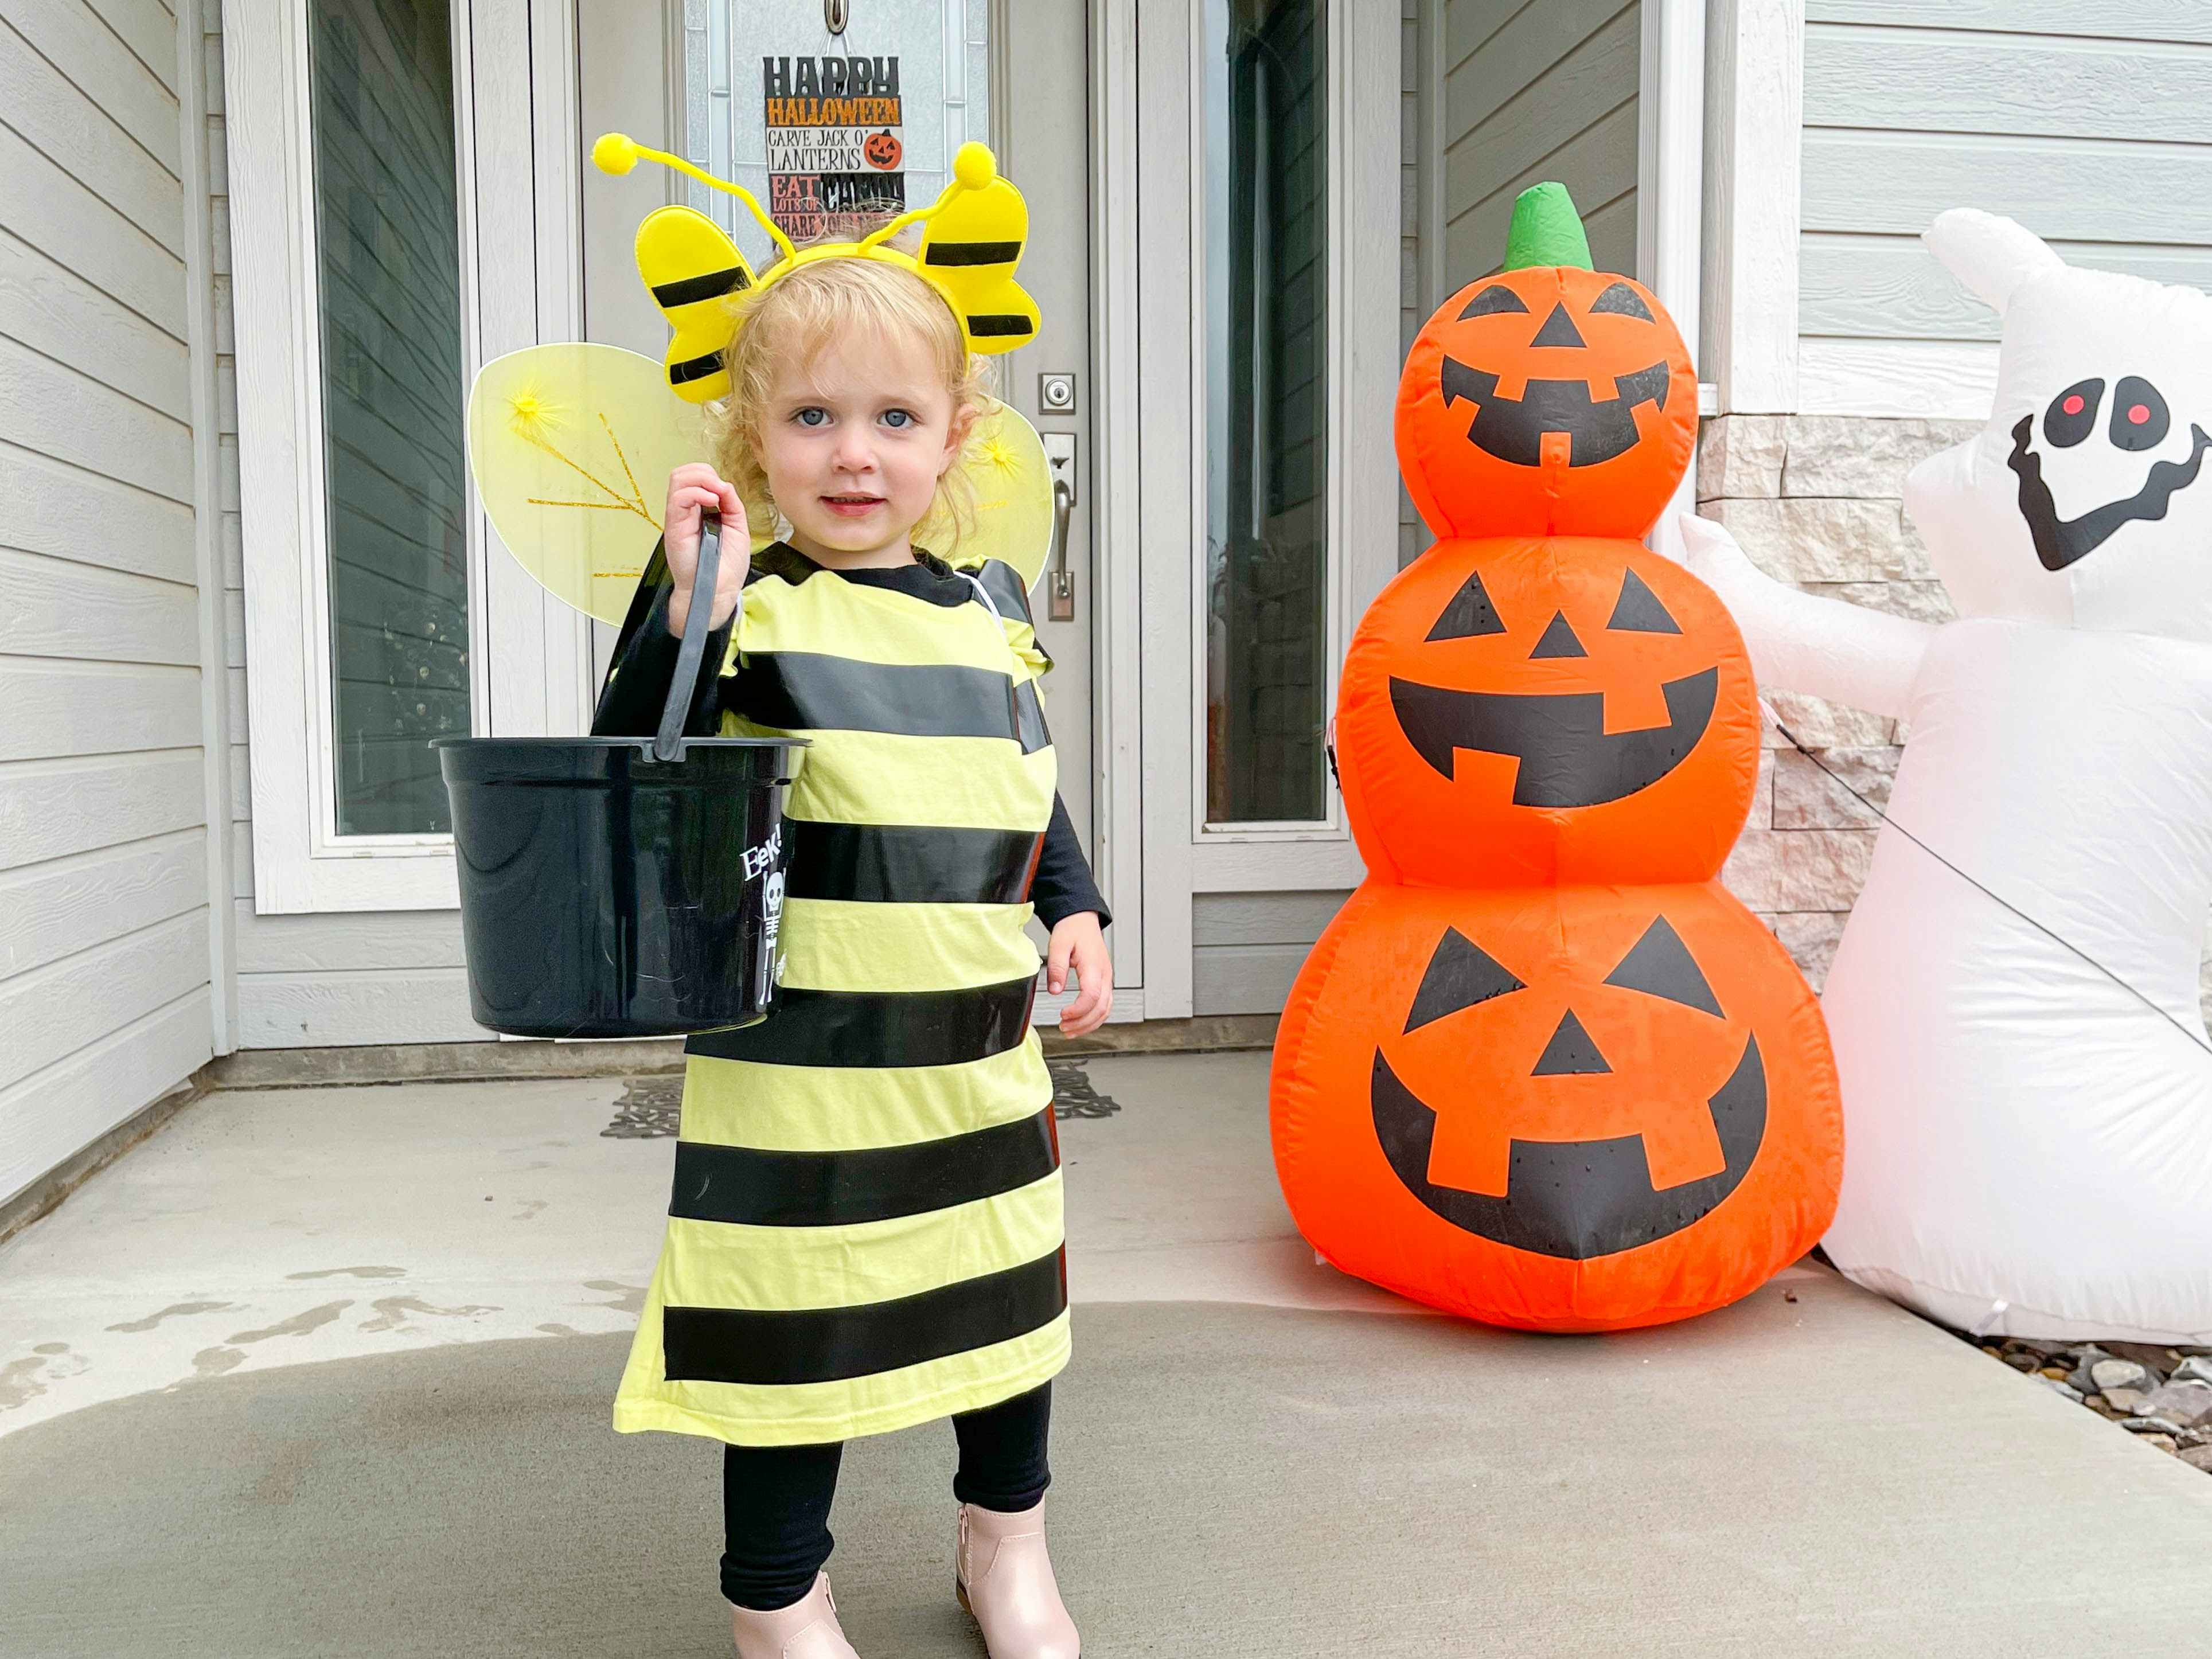 A little girl dressed as a bee standing on a front porch decorated for Halloween.